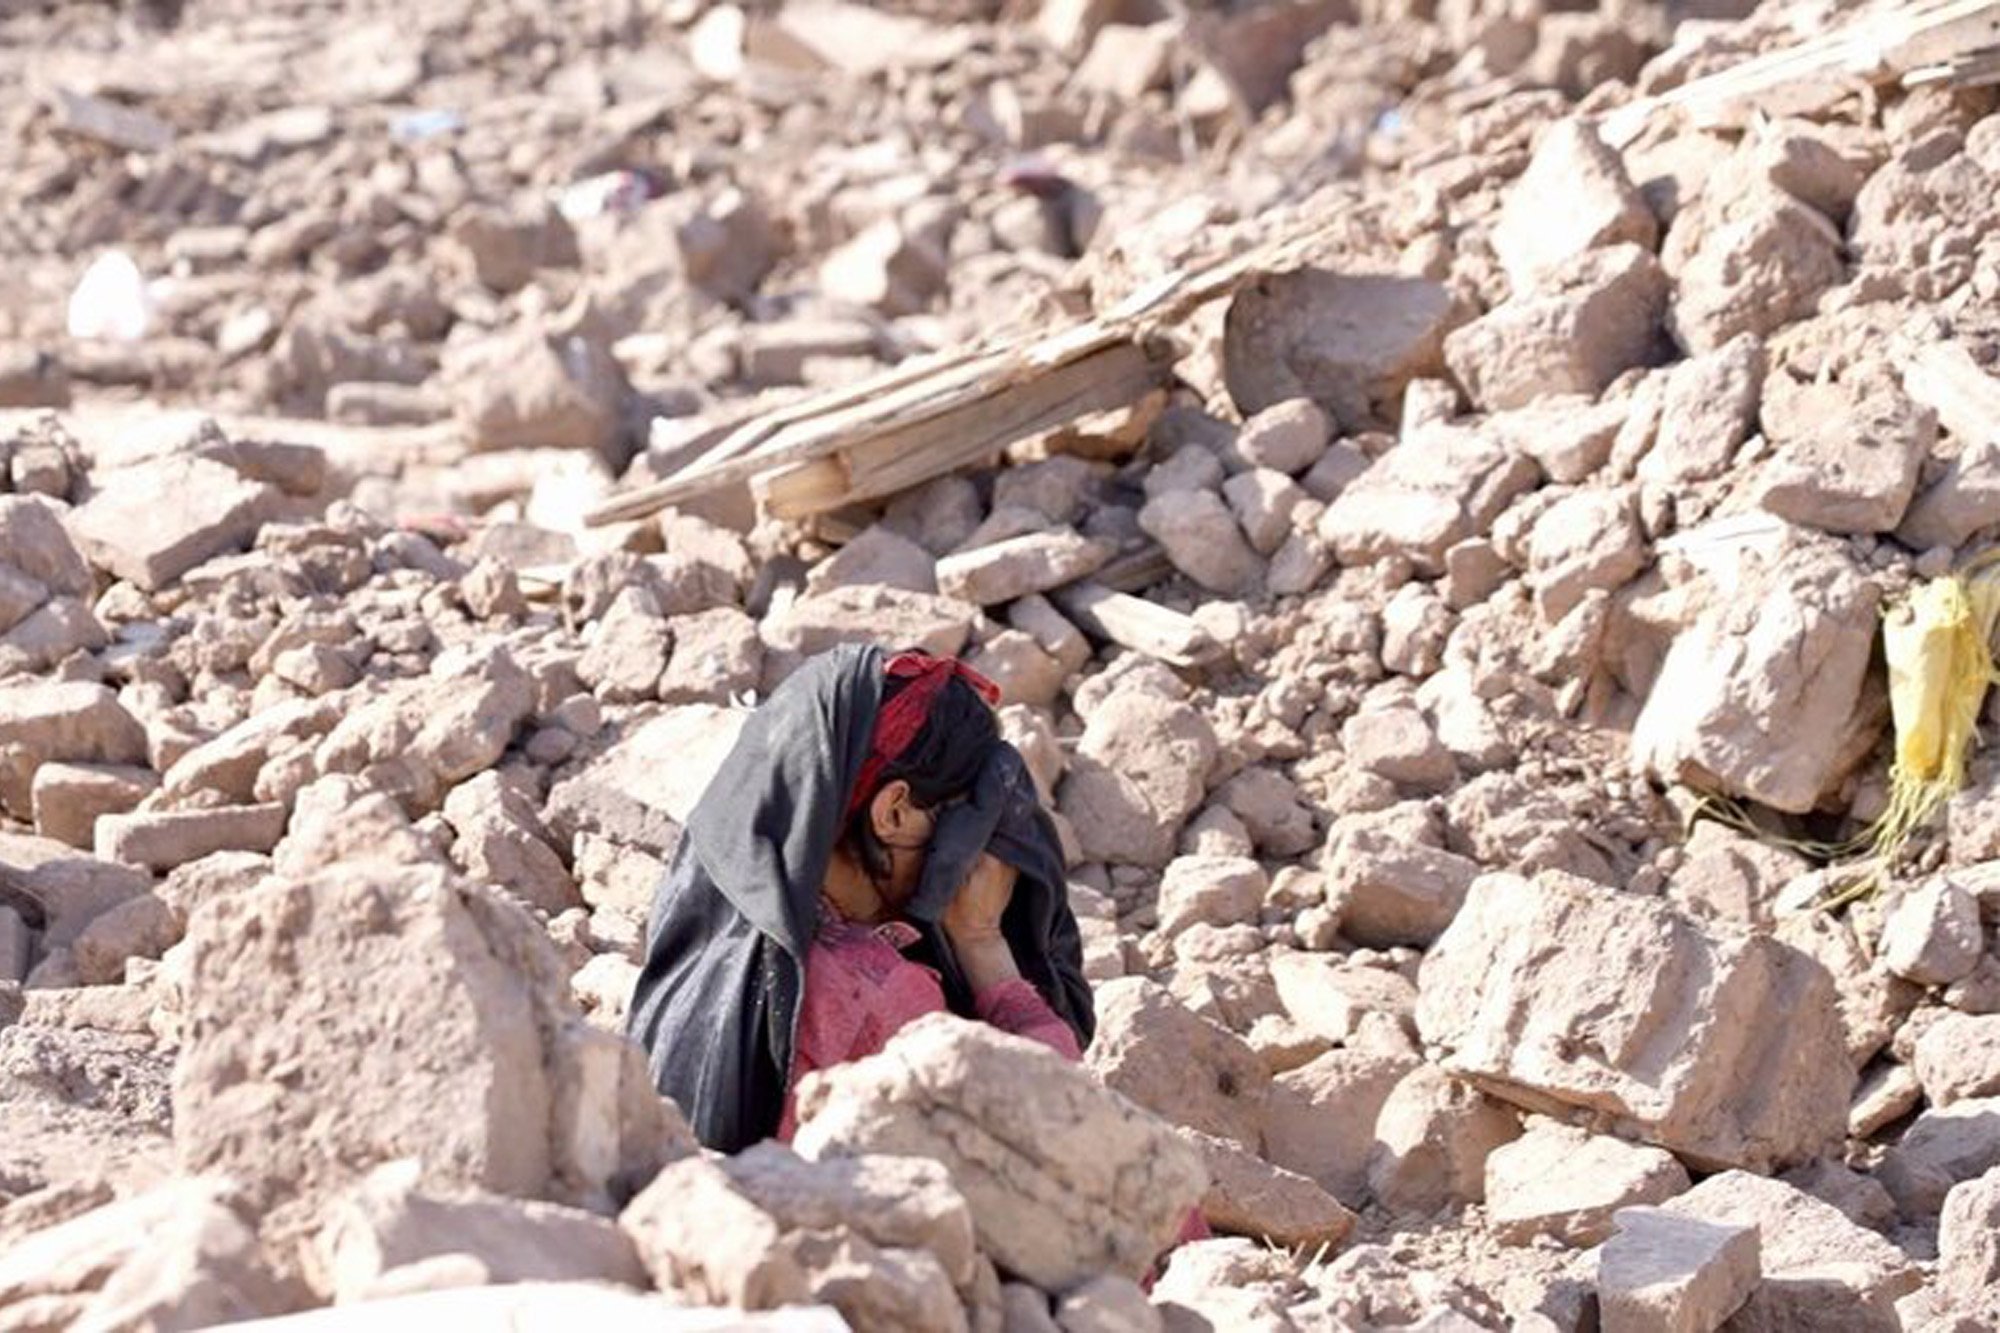 A grief-stricken woman in the rubble from the recent earthquake in Afghanistan.